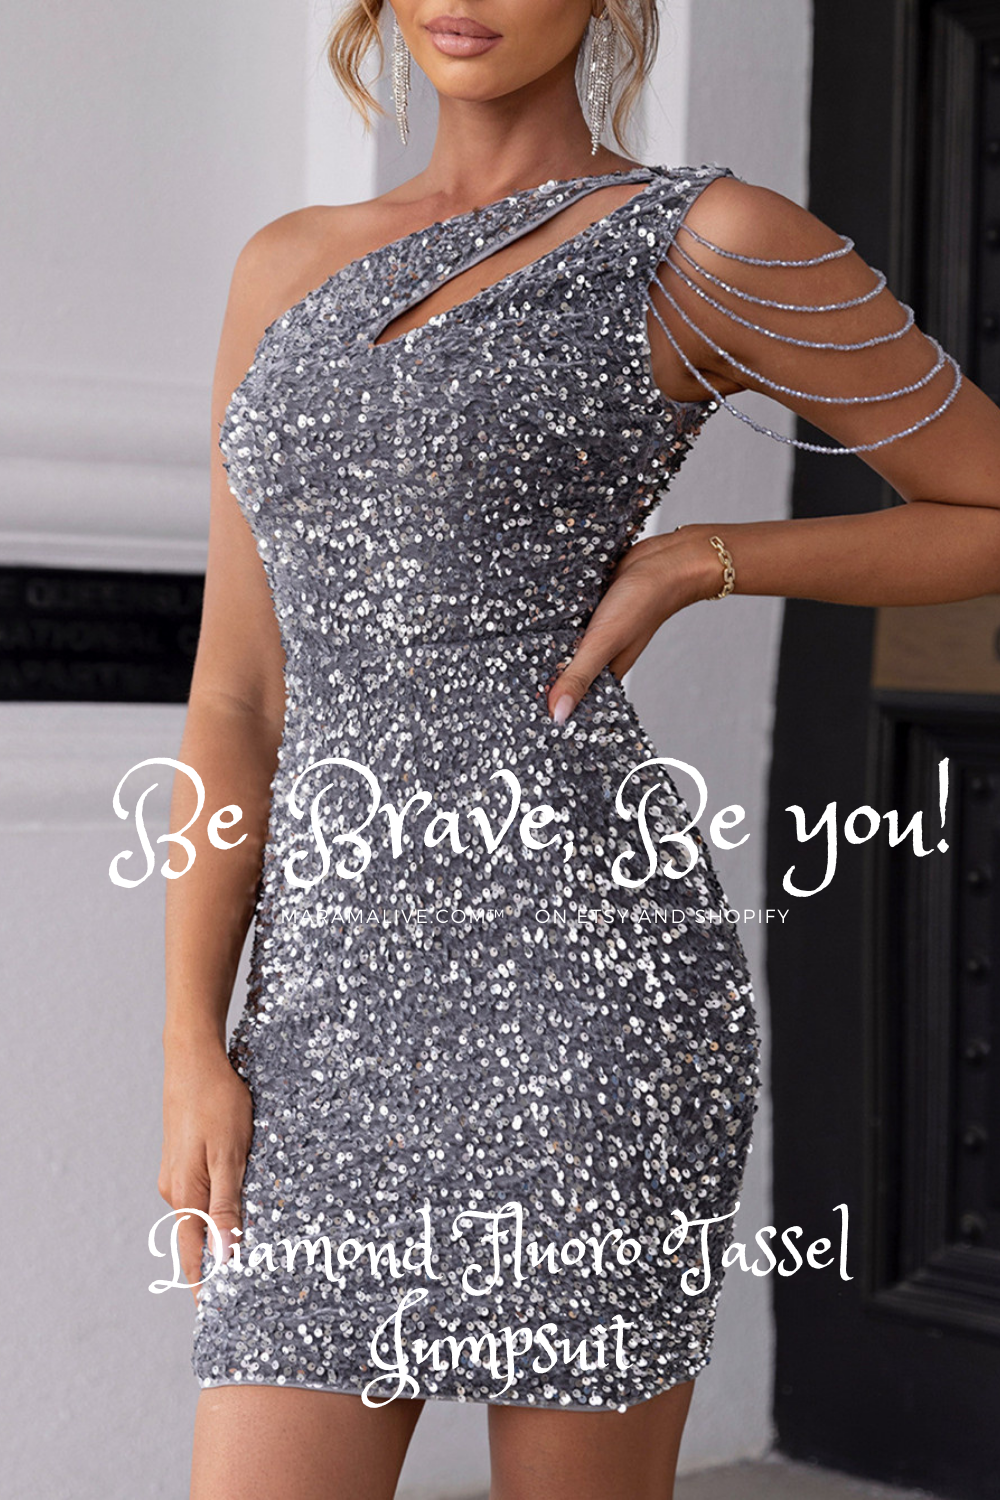 The model is wearing a Maramalive™ Single Shoulder Chain Detail Sequined Bodycon Dress.